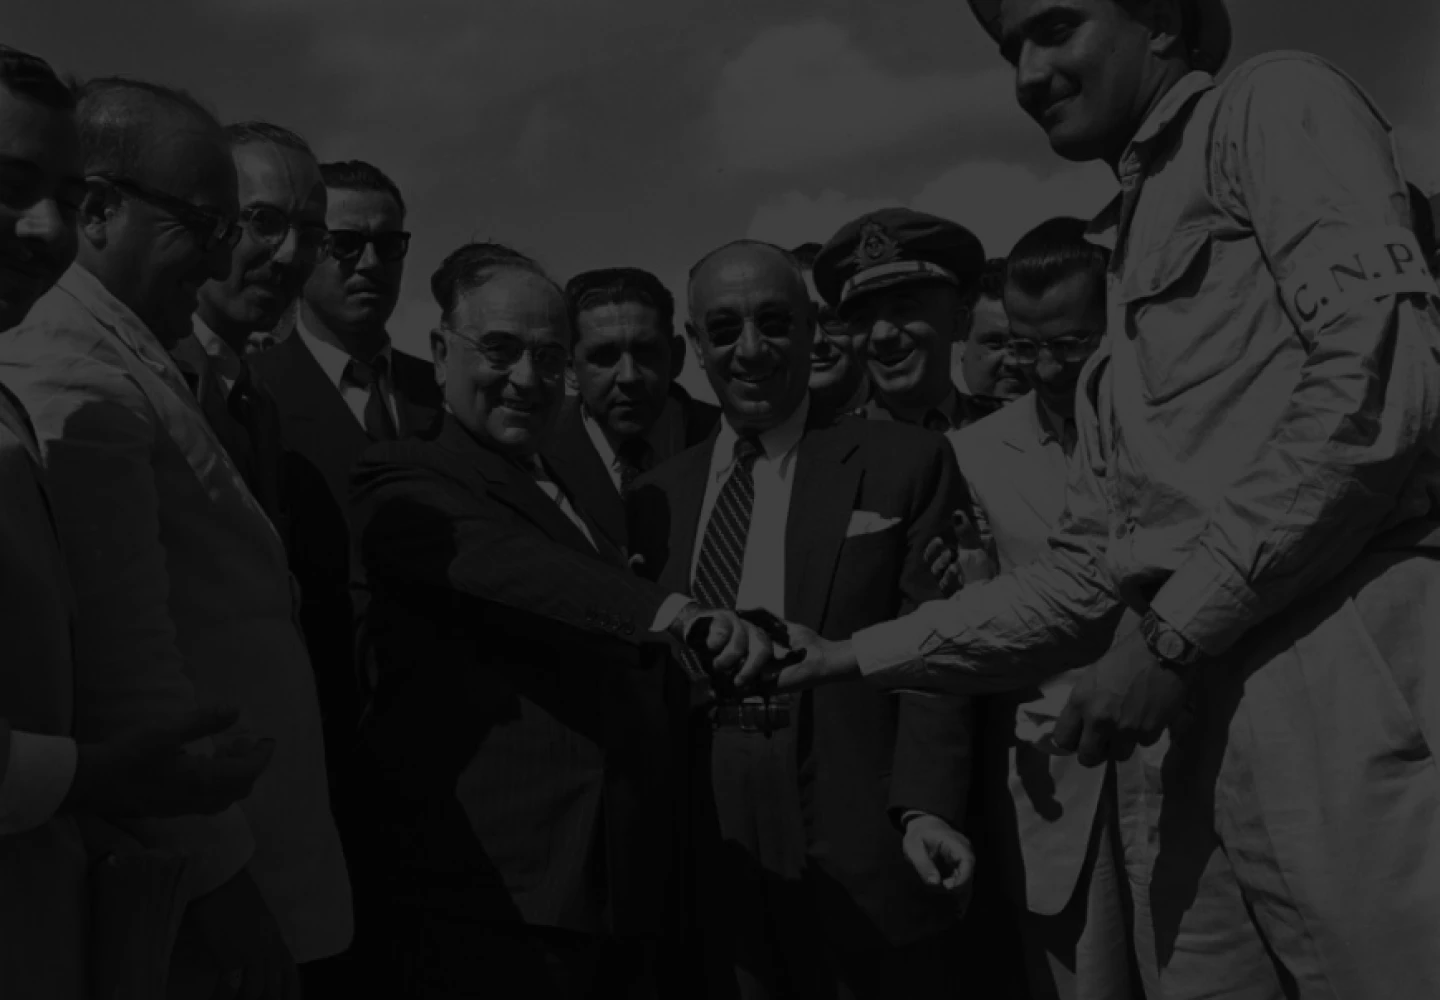 Black and white photo of the visit of then-President Getulio Vargas to one of Petrobras' operations.